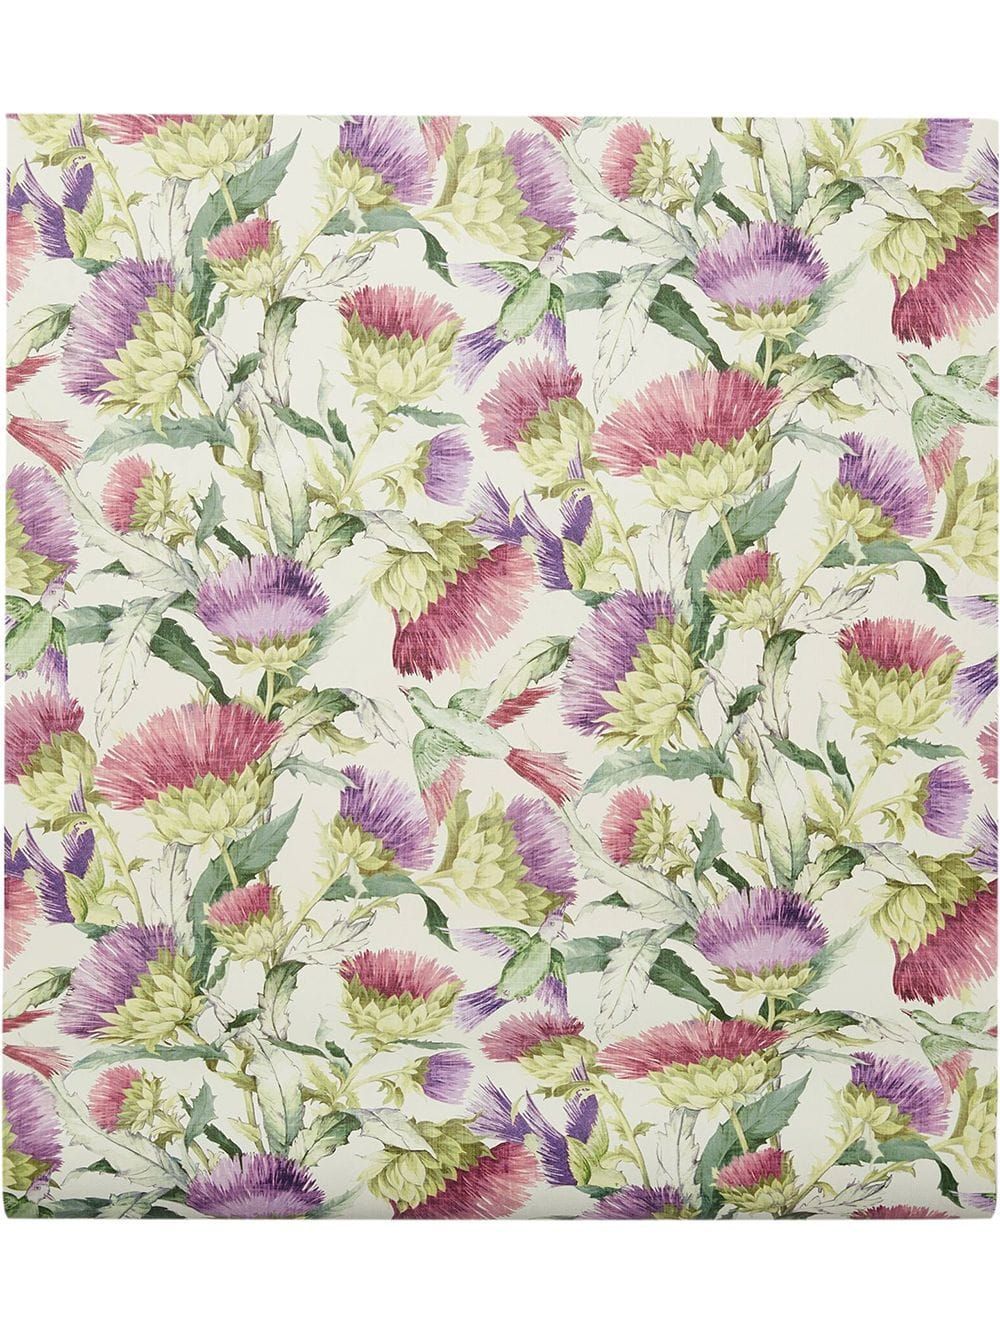 Gucci Kids Thistles and Birds print wallpaper. Bird prints, Print wallpaper, Thistle wallpaper